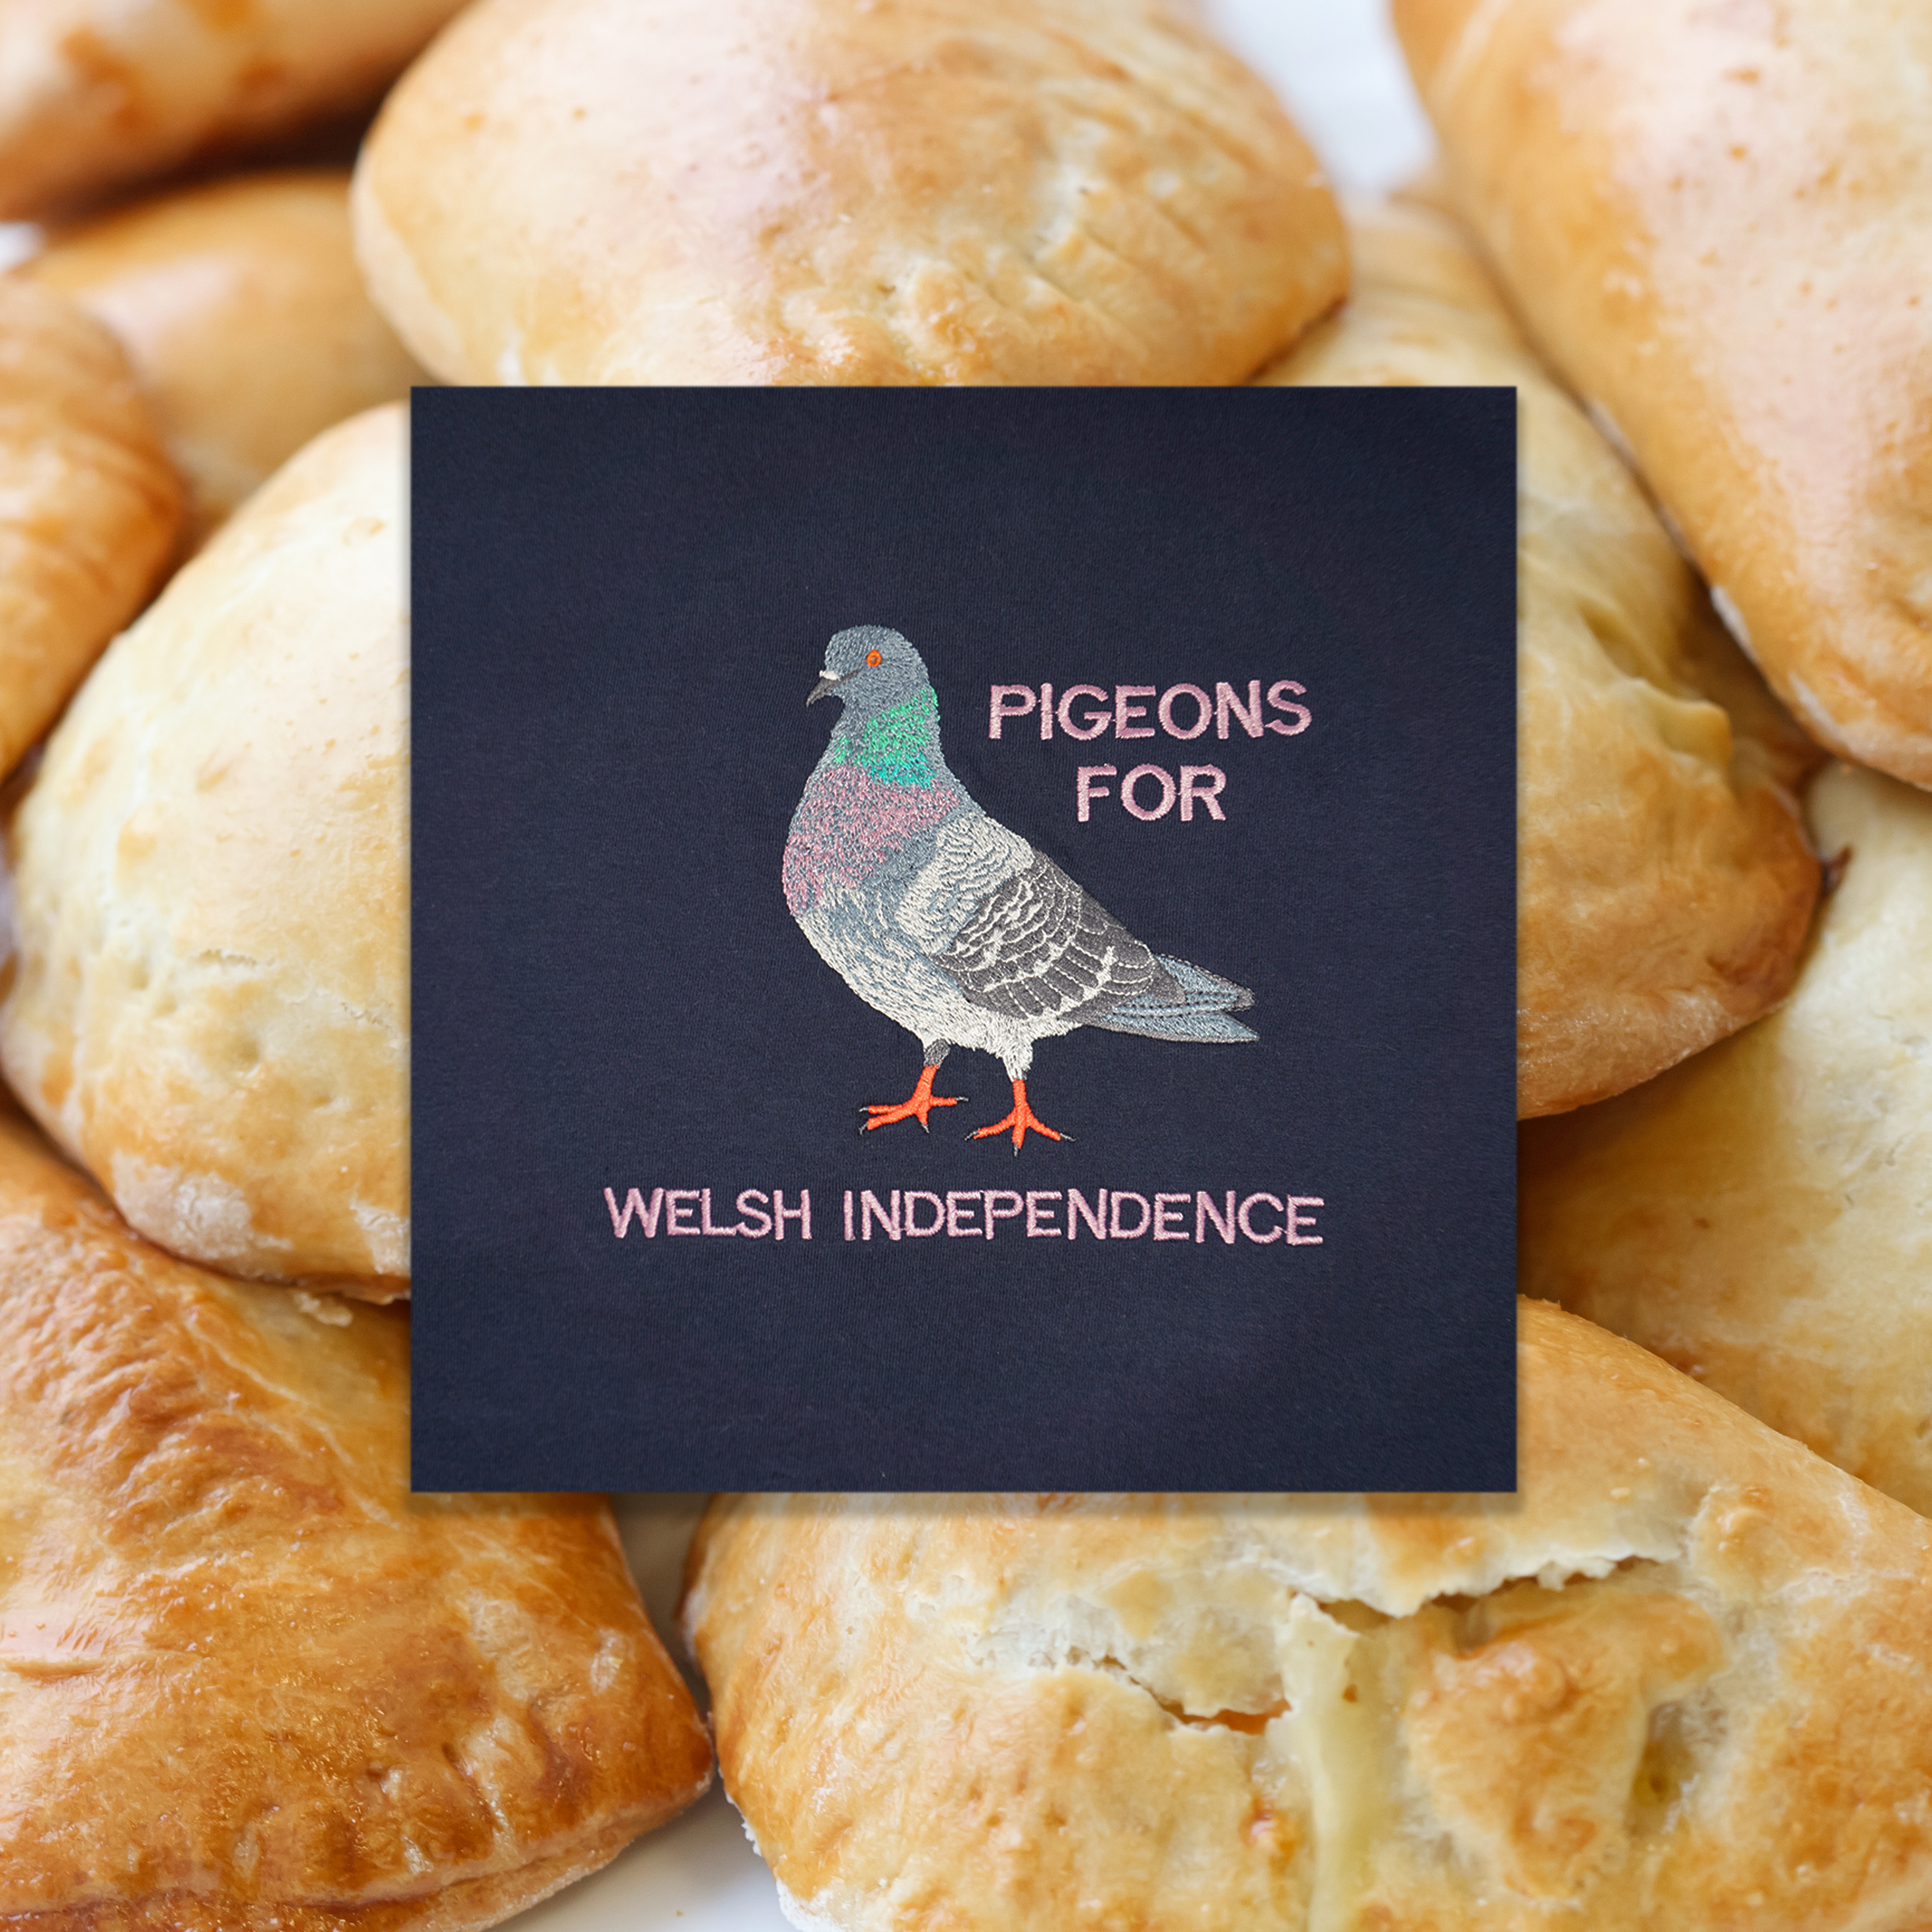 PIGEONS FOR WELSH INDEPENDENCE T-SHIRT